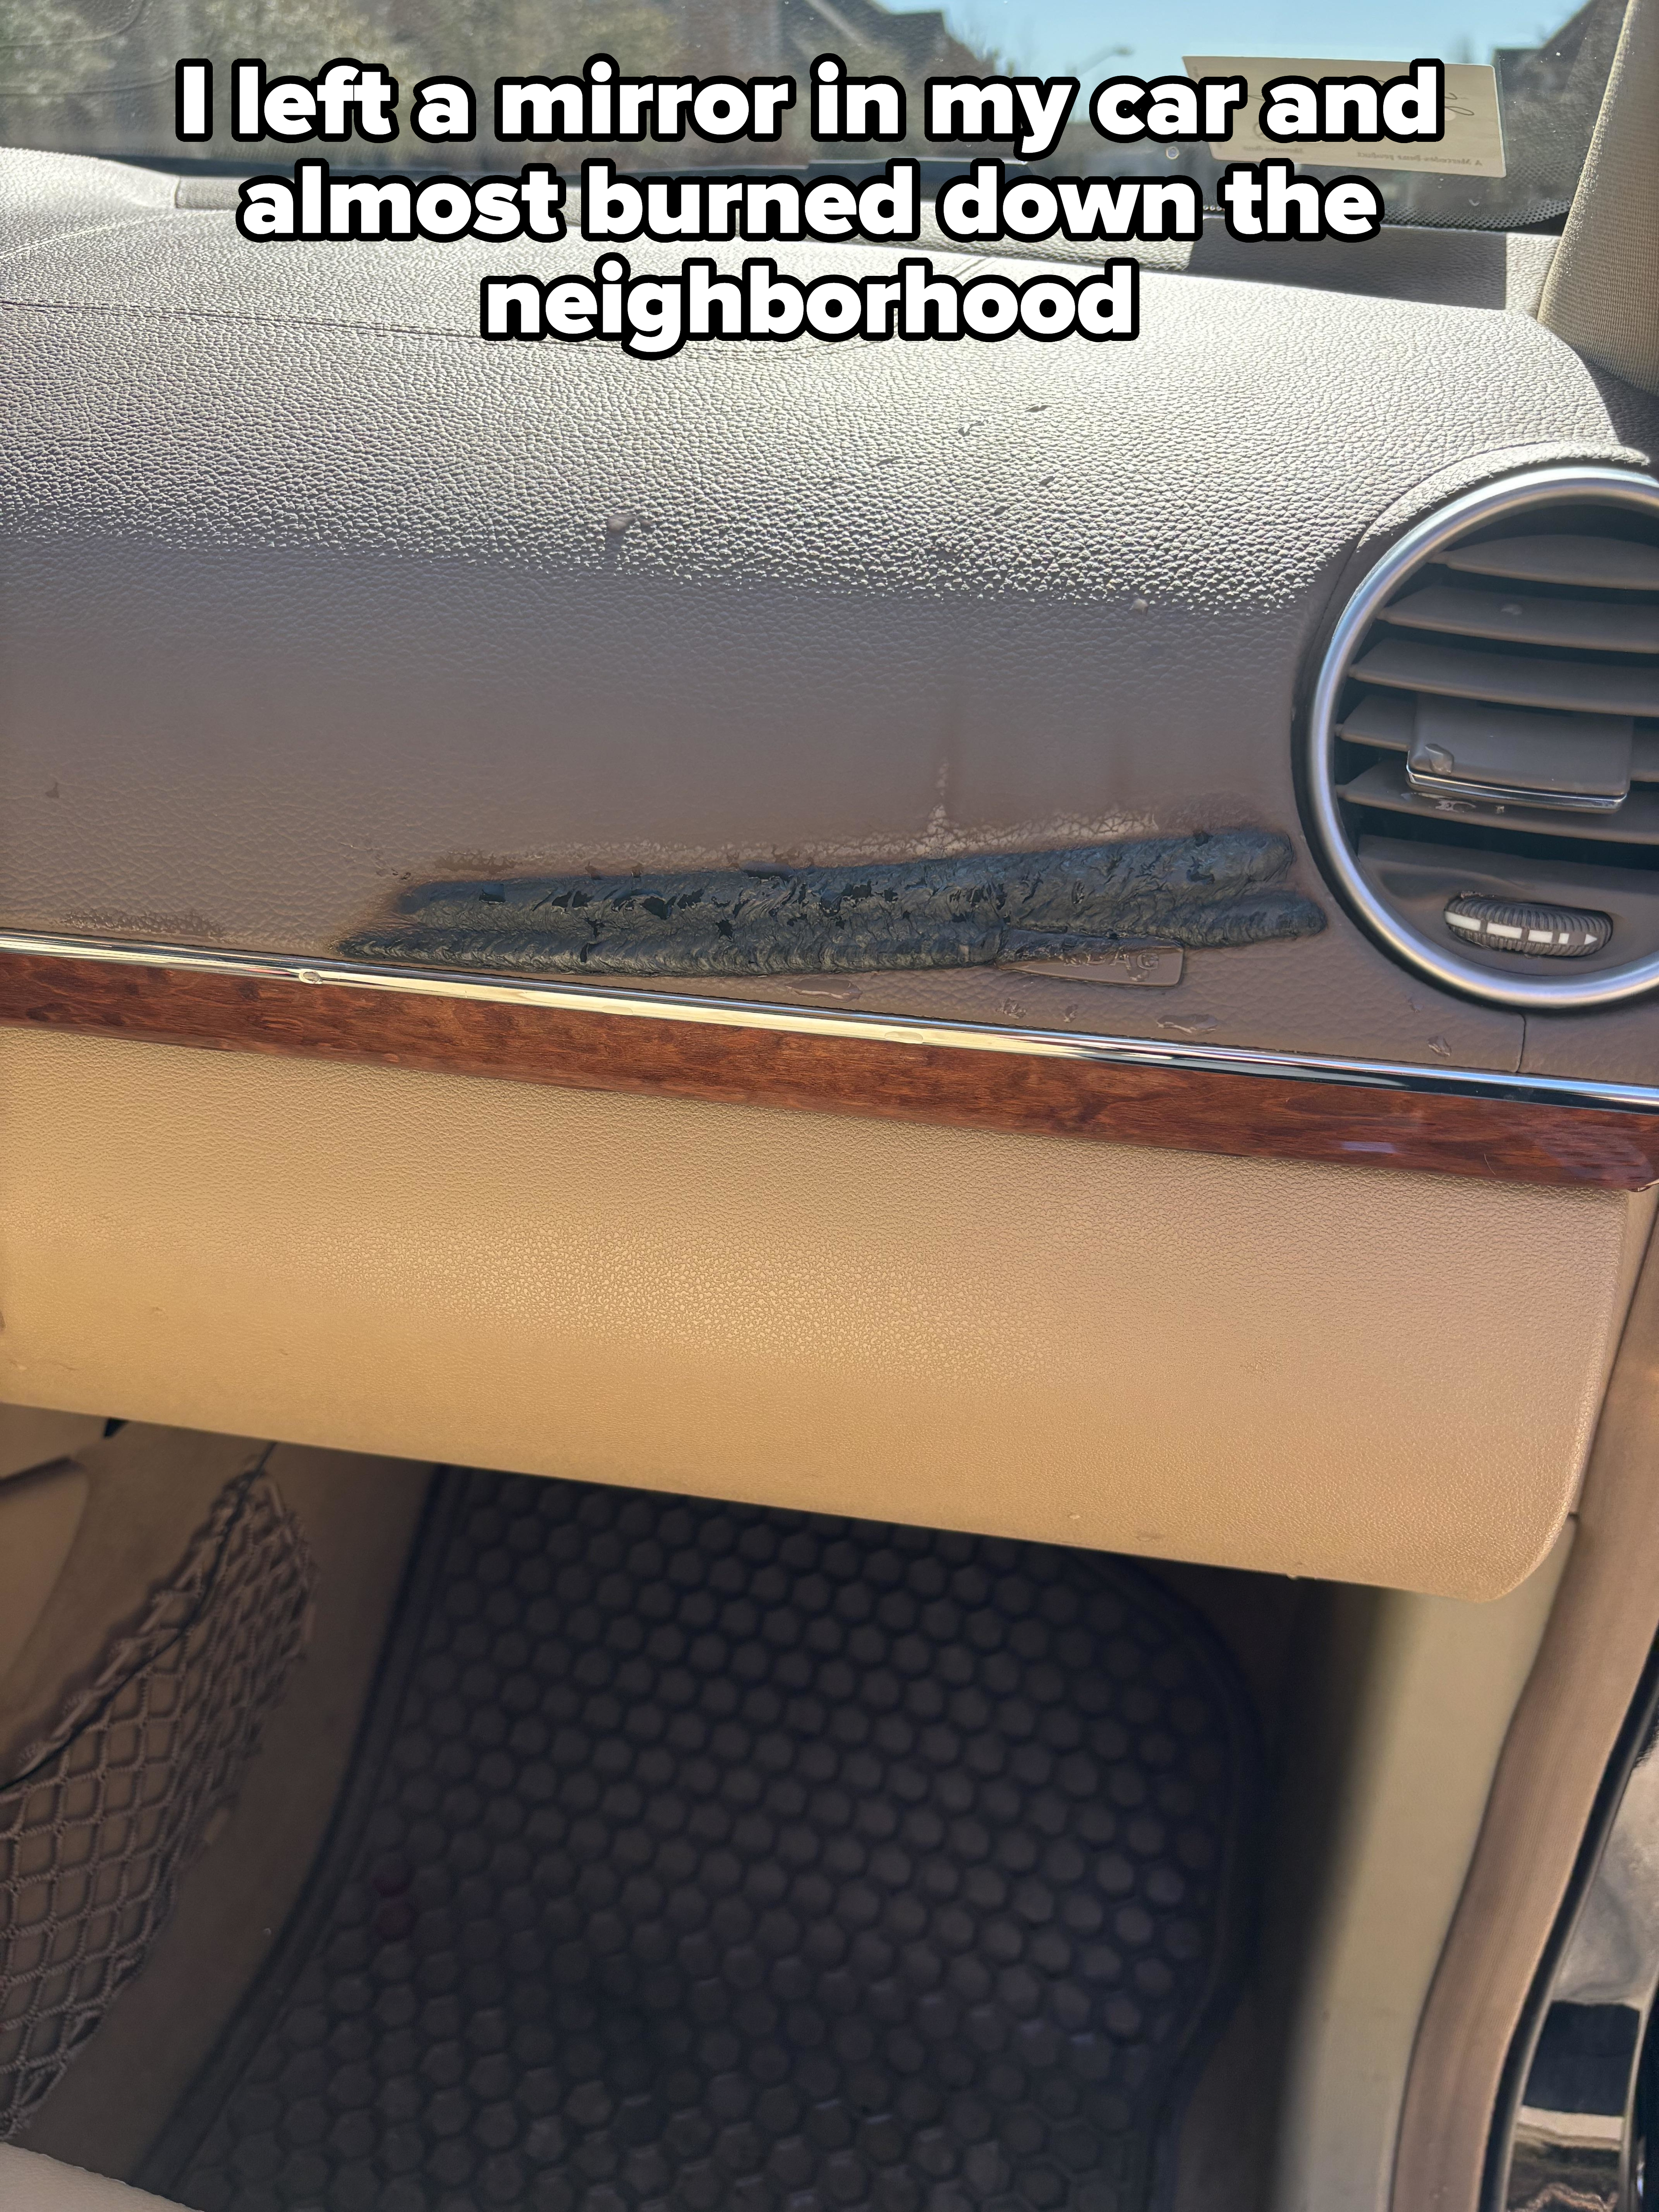 Car dashboard with peeling, charred area and caption, &quot;I left a mirror in my car and almost burned down the neighborhood&quot;